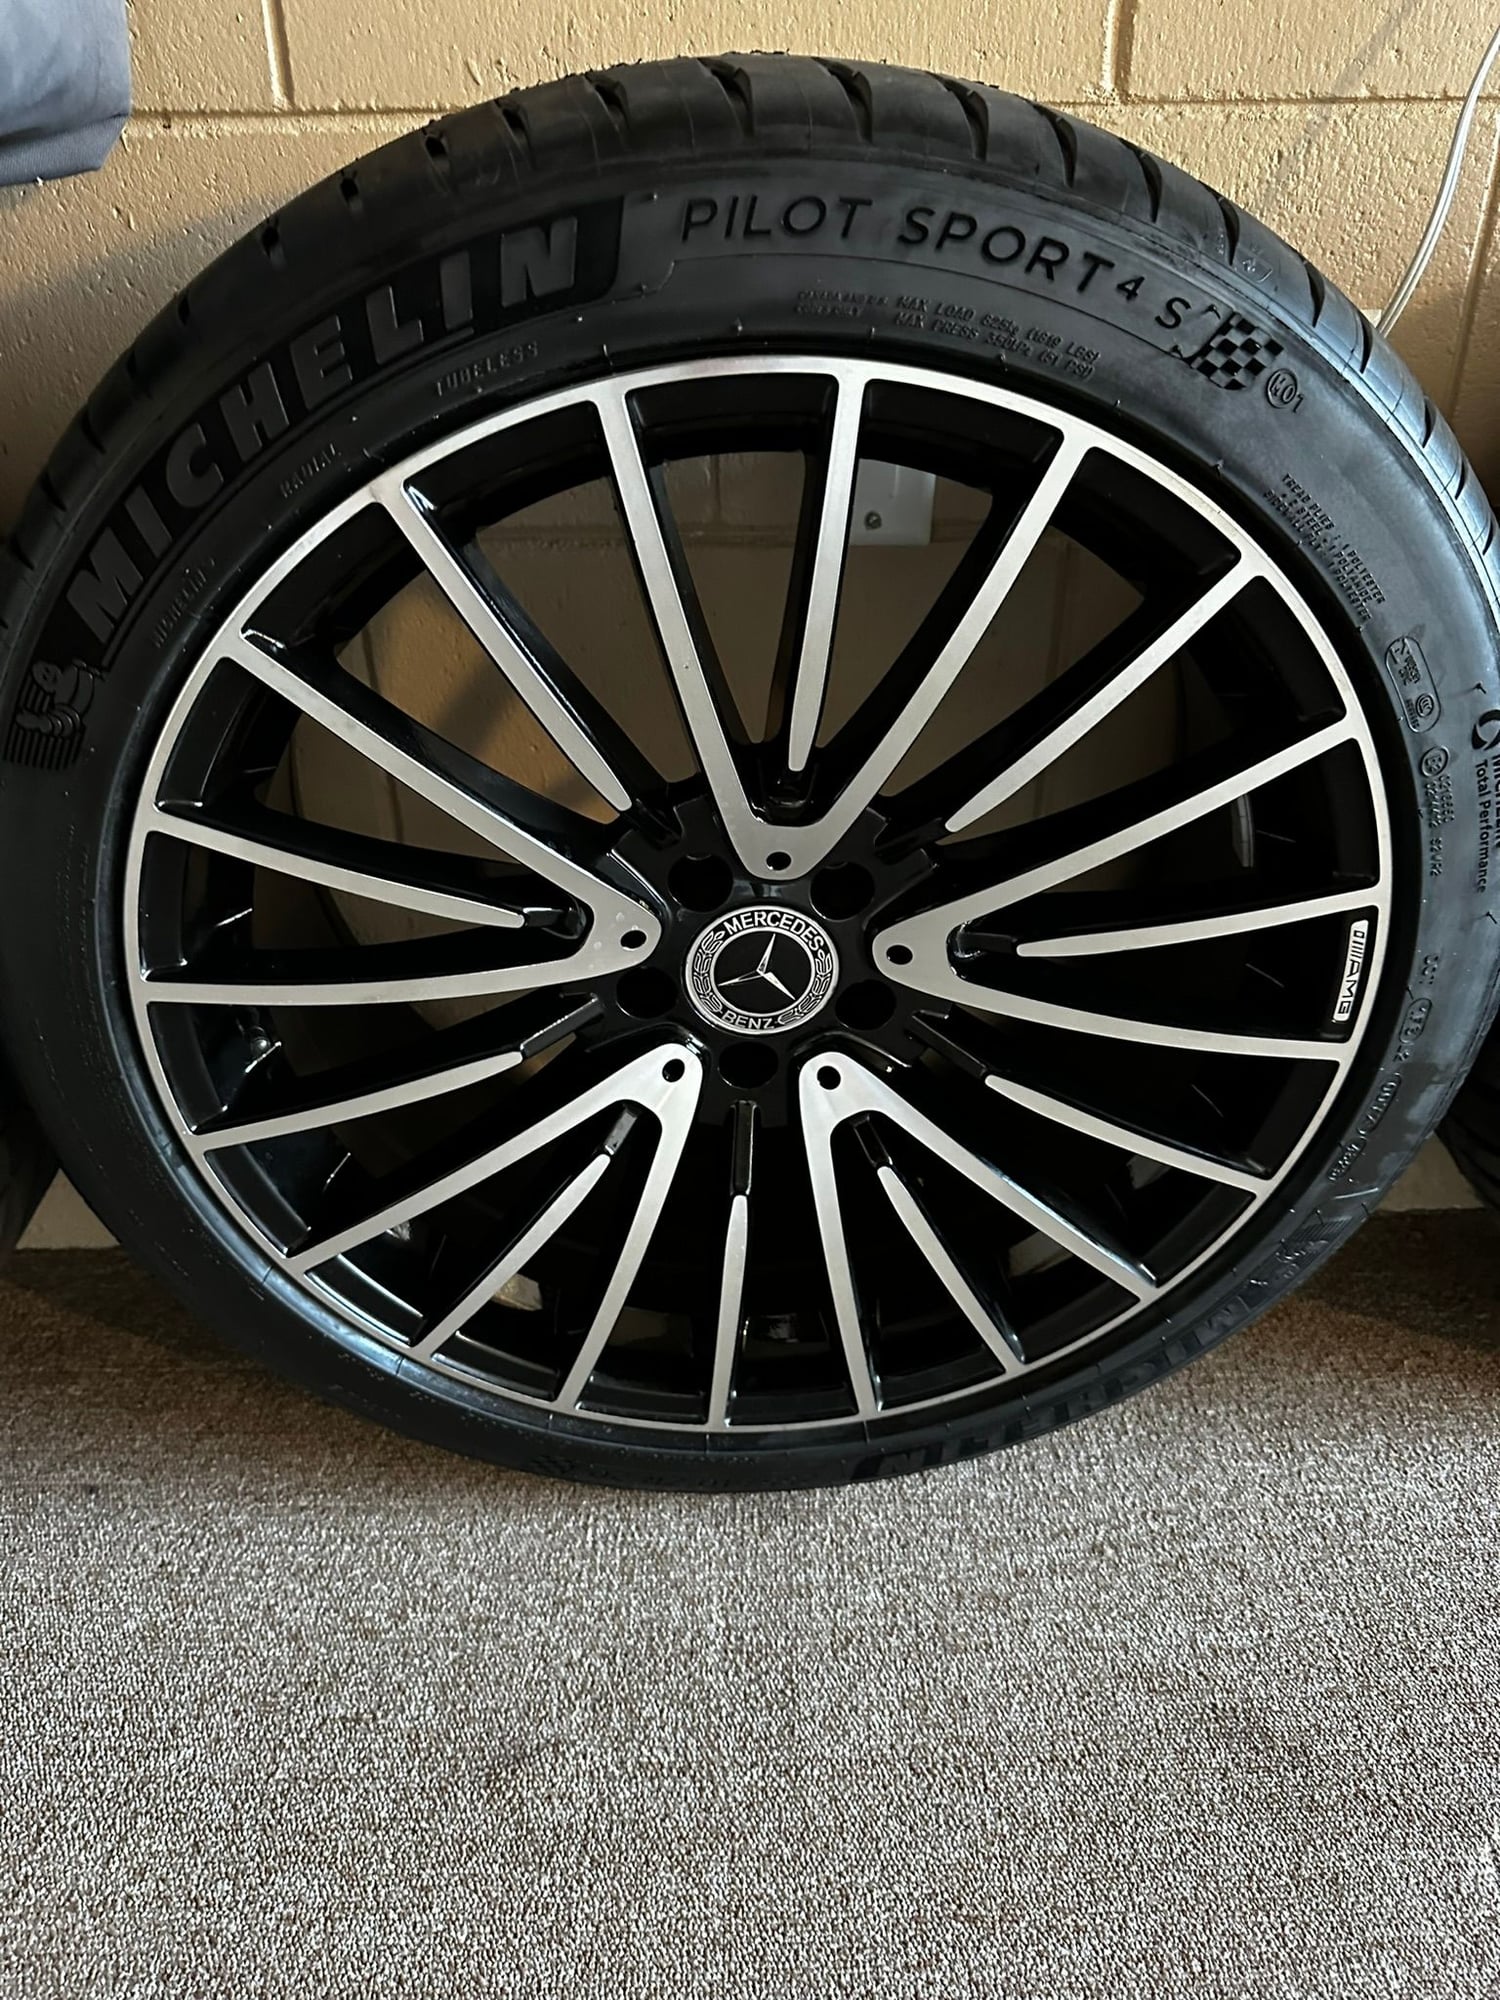 Wheels and Tires/Axles - 20" AMG style Wheels Michelin Sport 4s Tires - BRAND NEW. - New - 2021 to 2024 Mercedes-Benz S-Class - Celebration, FL 34747, United States